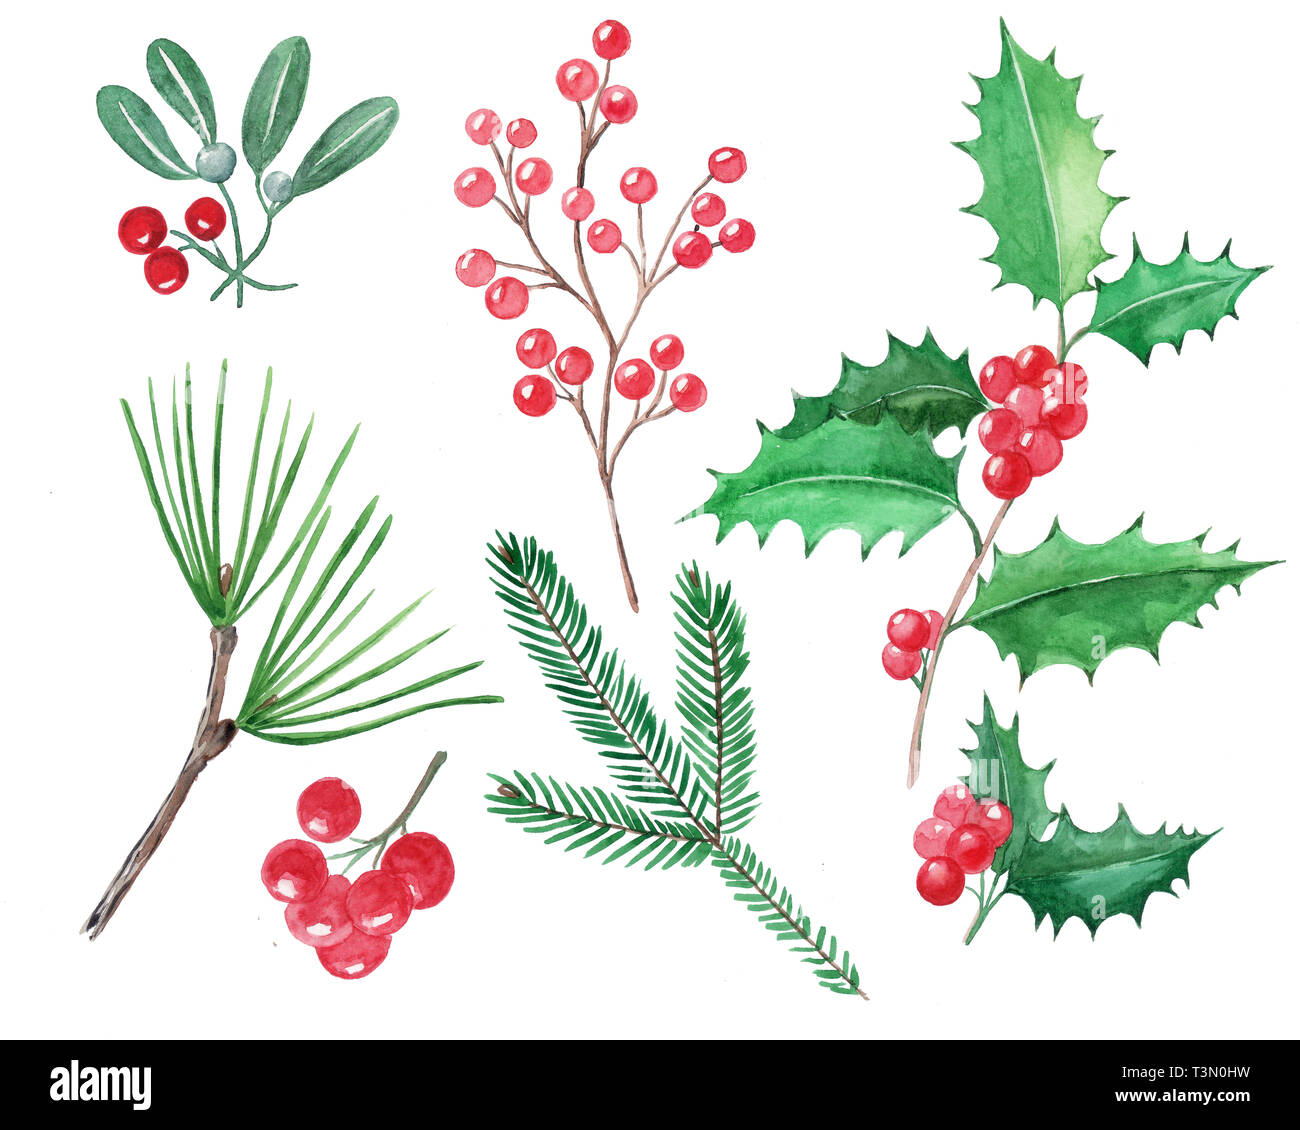 Set of Christmas elements, red berries, holly, mistletoe, hand drawn illustration, watercolor Stock Photo